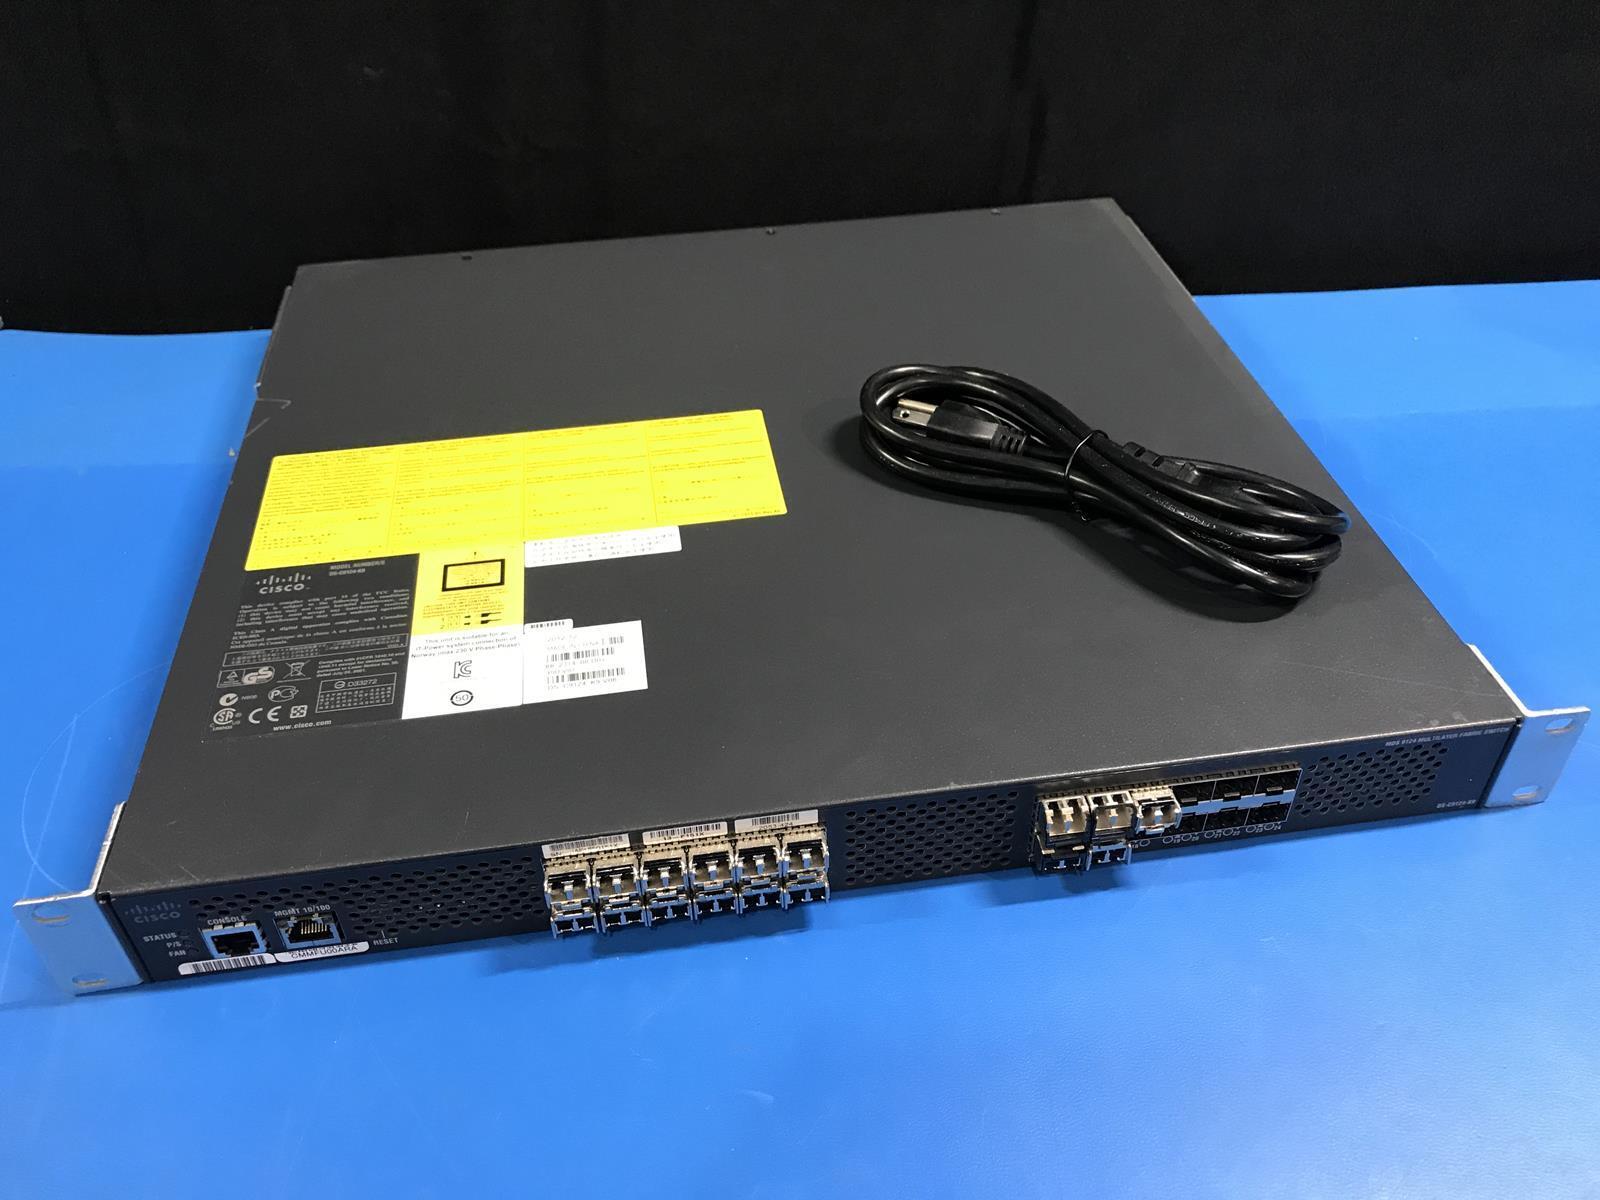 Cisco DS-C9124-K9 MDS 9124 24 Port Multilayer Fabric Switch